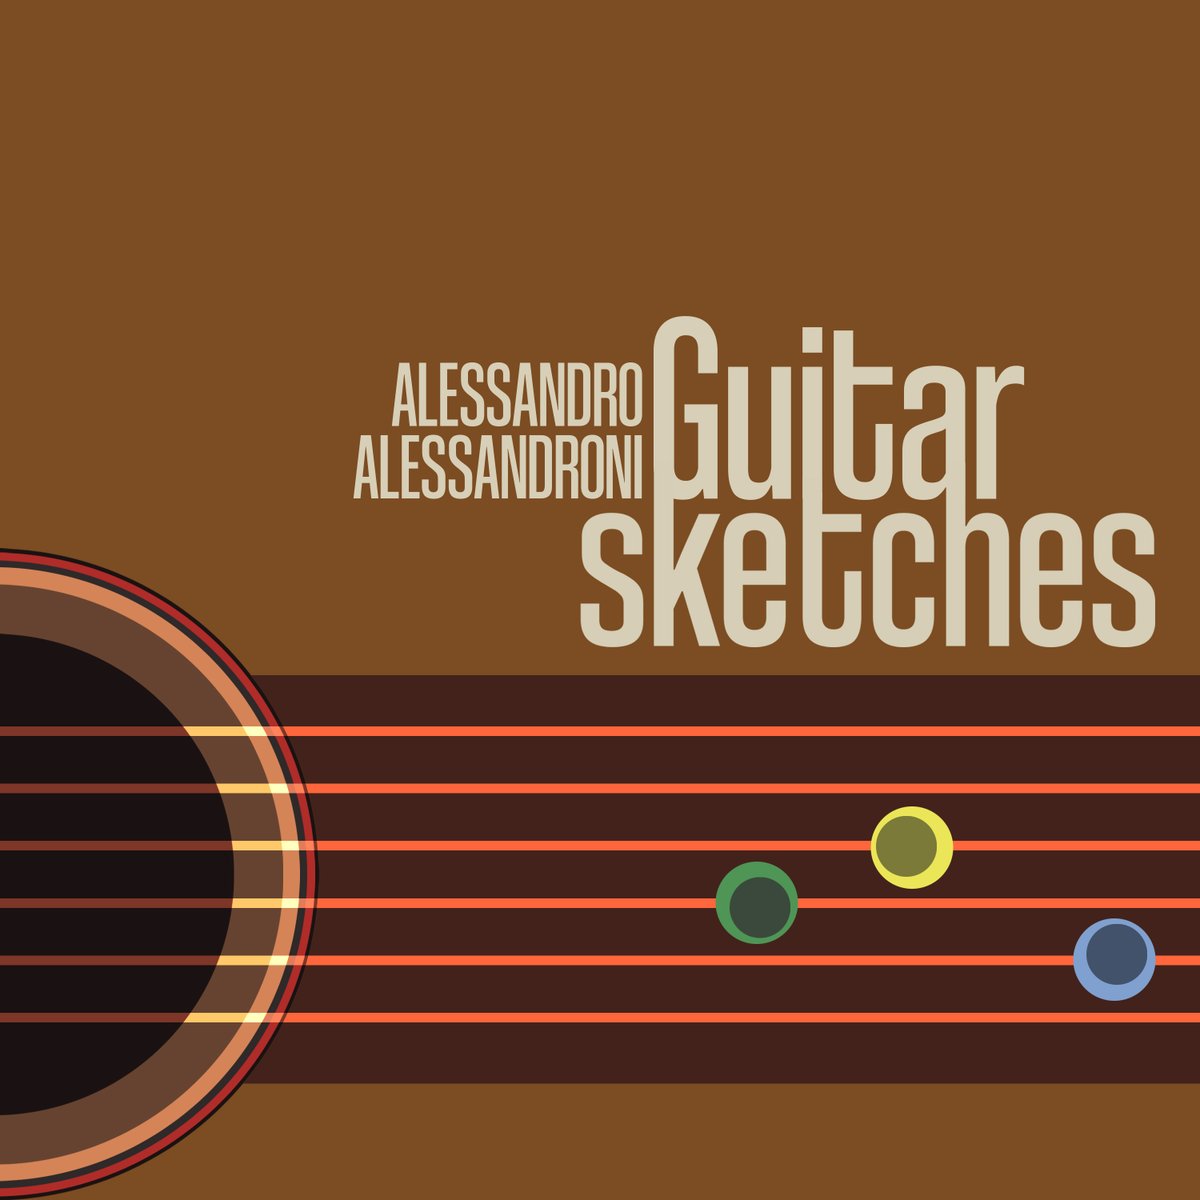 🎸 NEW DIGITAL RELEASE 🎸 “Guitar Sketches” by Alessandro Alessandroni is a collection of twelve melancholic pieces, all previously unreleased and now available for the first time ever in DIGITAL FORMAT. Listen here 👉 found.ee/GuitarSketches #FourFlies #FF